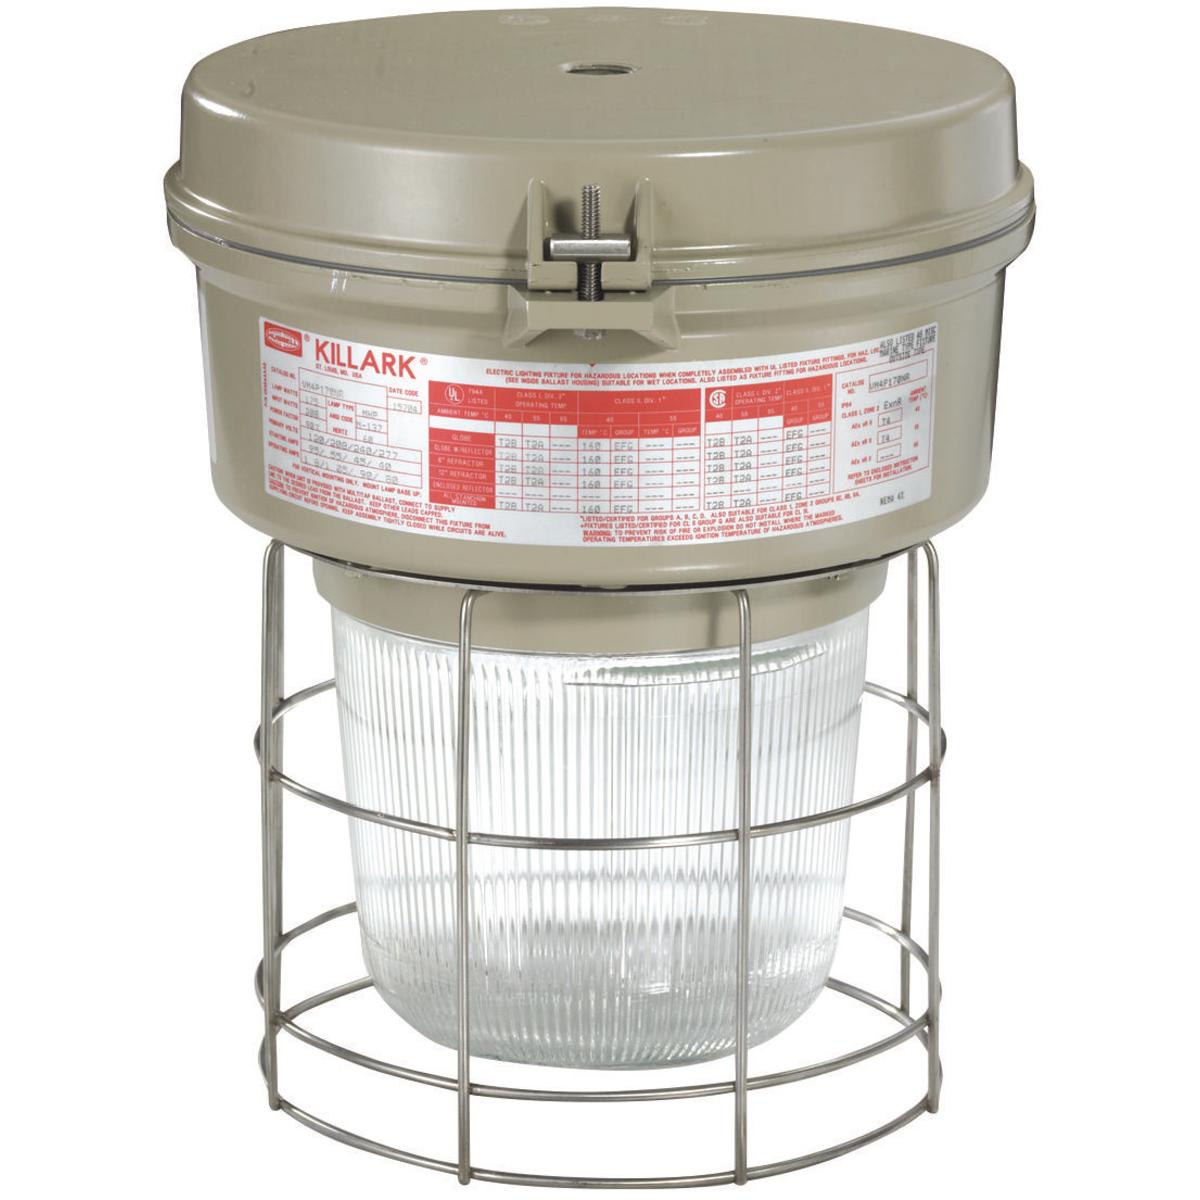 Hubbell VM4P205A2GLG VM4 Series - 200W Metal Halide 480V - 3/4" Pendant - Globe and Guard  ; Ballast tank and splice box – corrosion resistant copper-free aluminum alloy with baked powder epoxy/polyester finish, electrostatically applied for complete, uniform corrosion protec